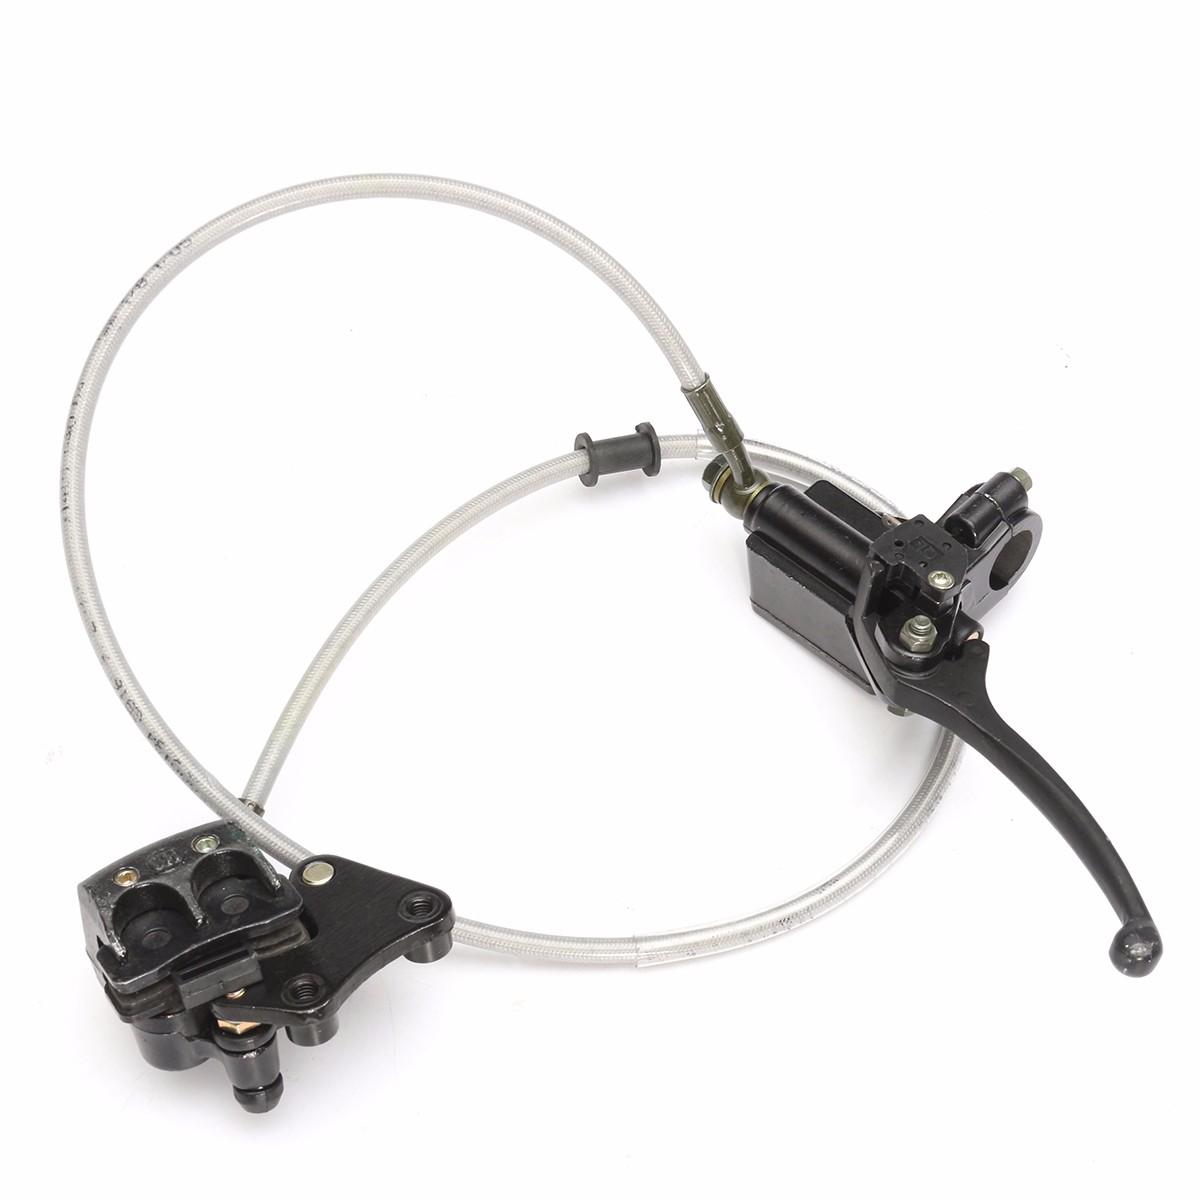 Front Hydraulic Brake Master Cylinder For 110cc 125cc 140cc Pit Dirt Bike, Banggood  - buy with discount